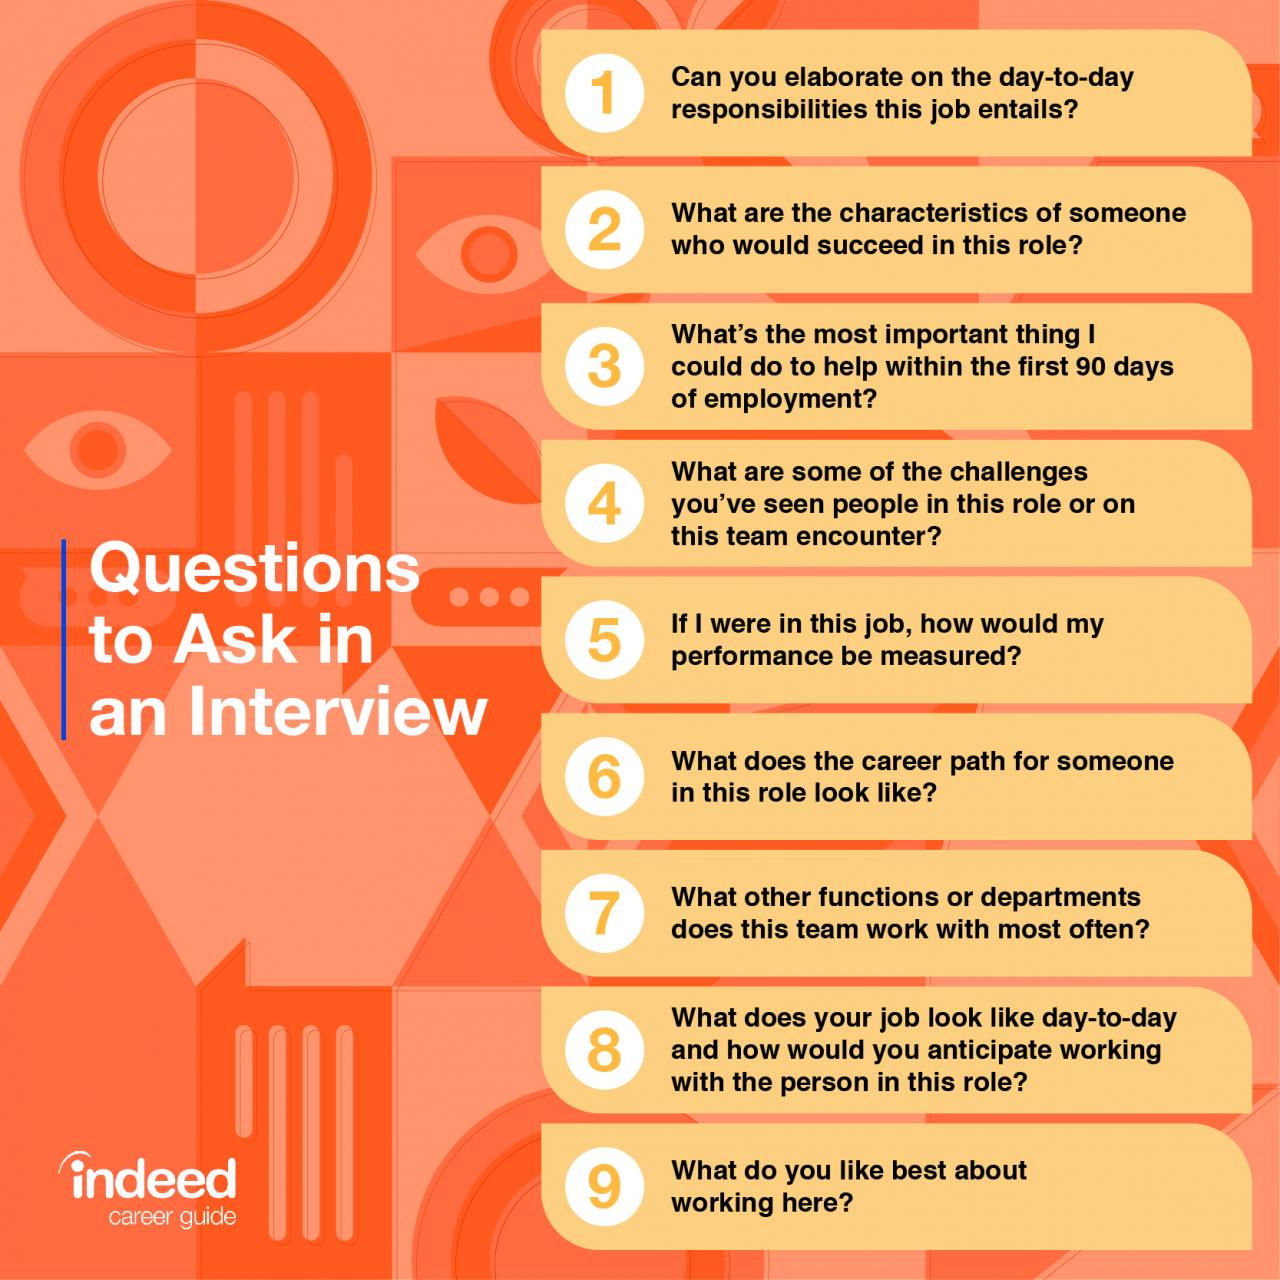 Good questions to ask in an interview as an interviewer